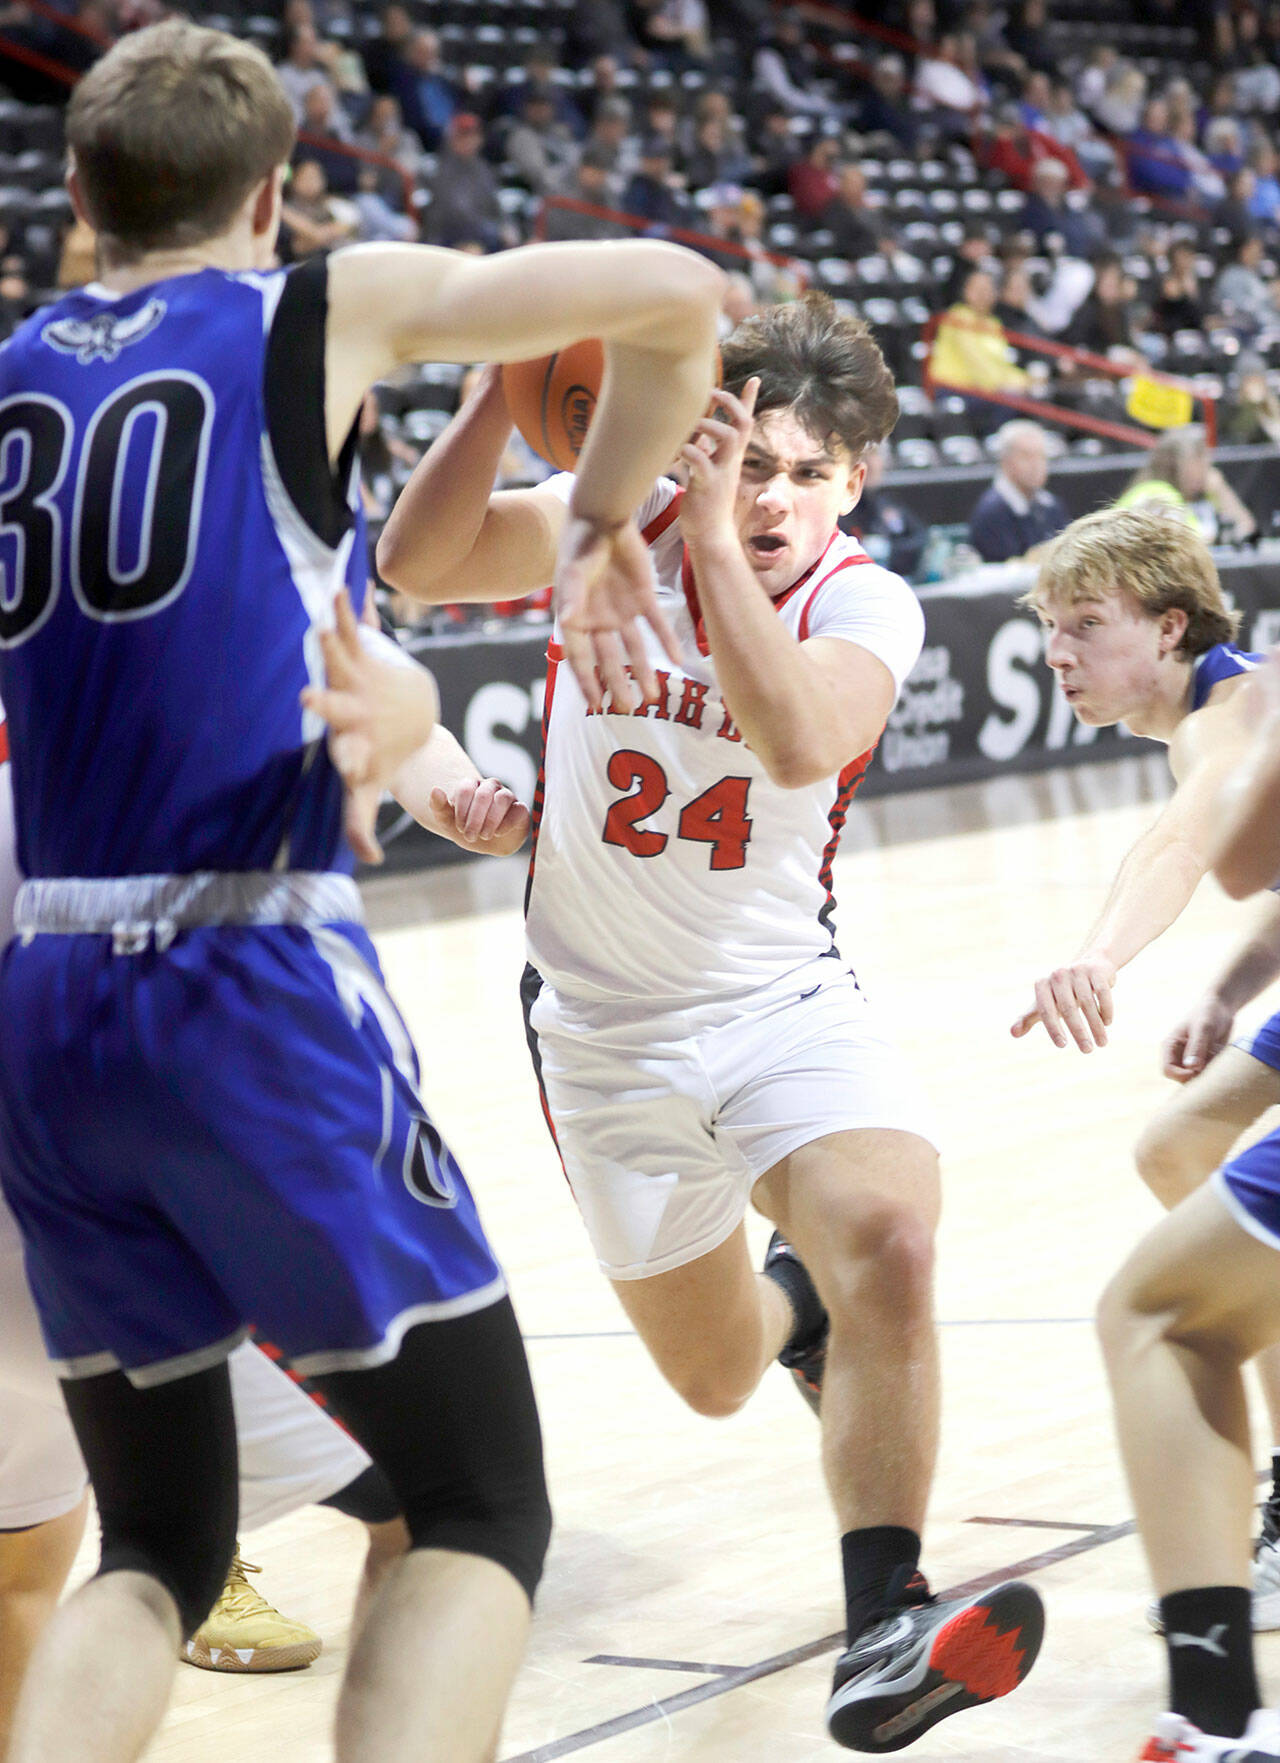 Neah Bay’s Tyler Swan drives to the hoop during the Red Devils Class 1B state boys basketball tournament opener against Oakesdale at the Spokane Arena. (Roger Harnack/Cheney Free Press)